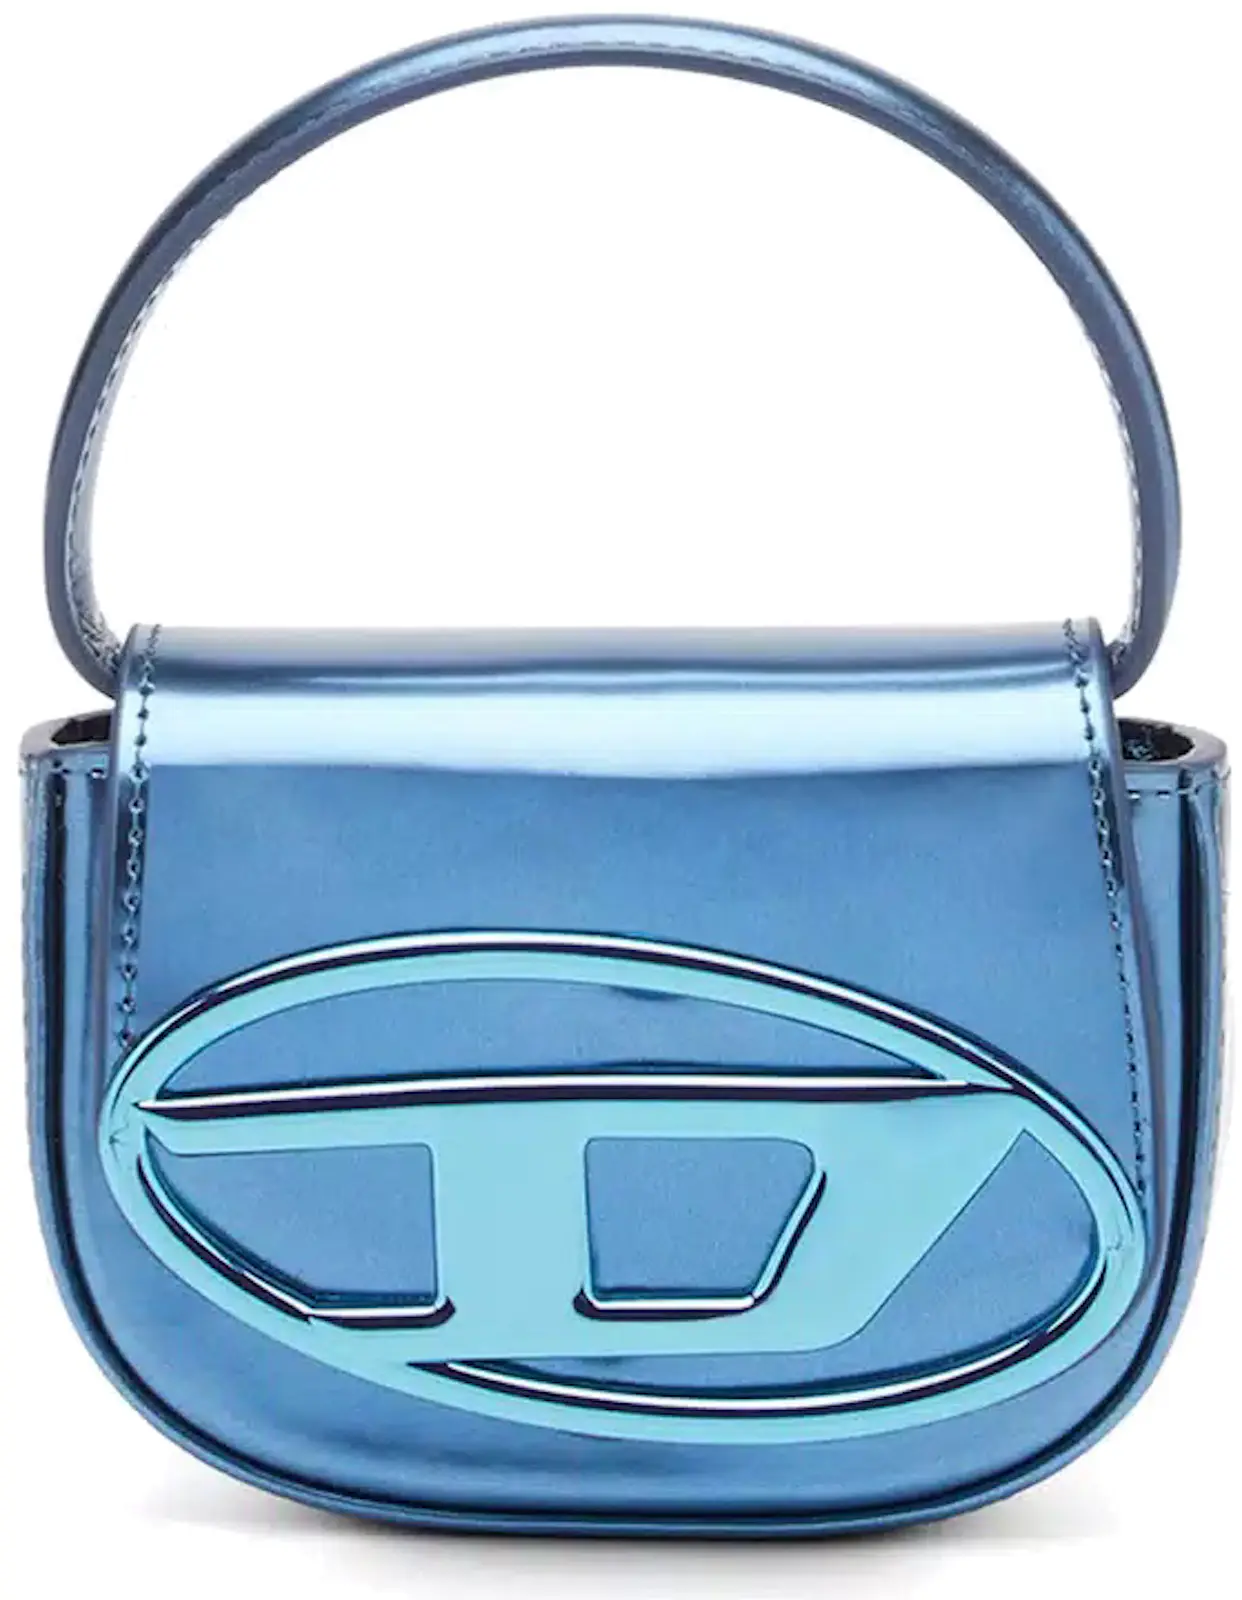 Diesel 1DR XS Mini Bag with D Plaque Blue in Mirrored Leather with